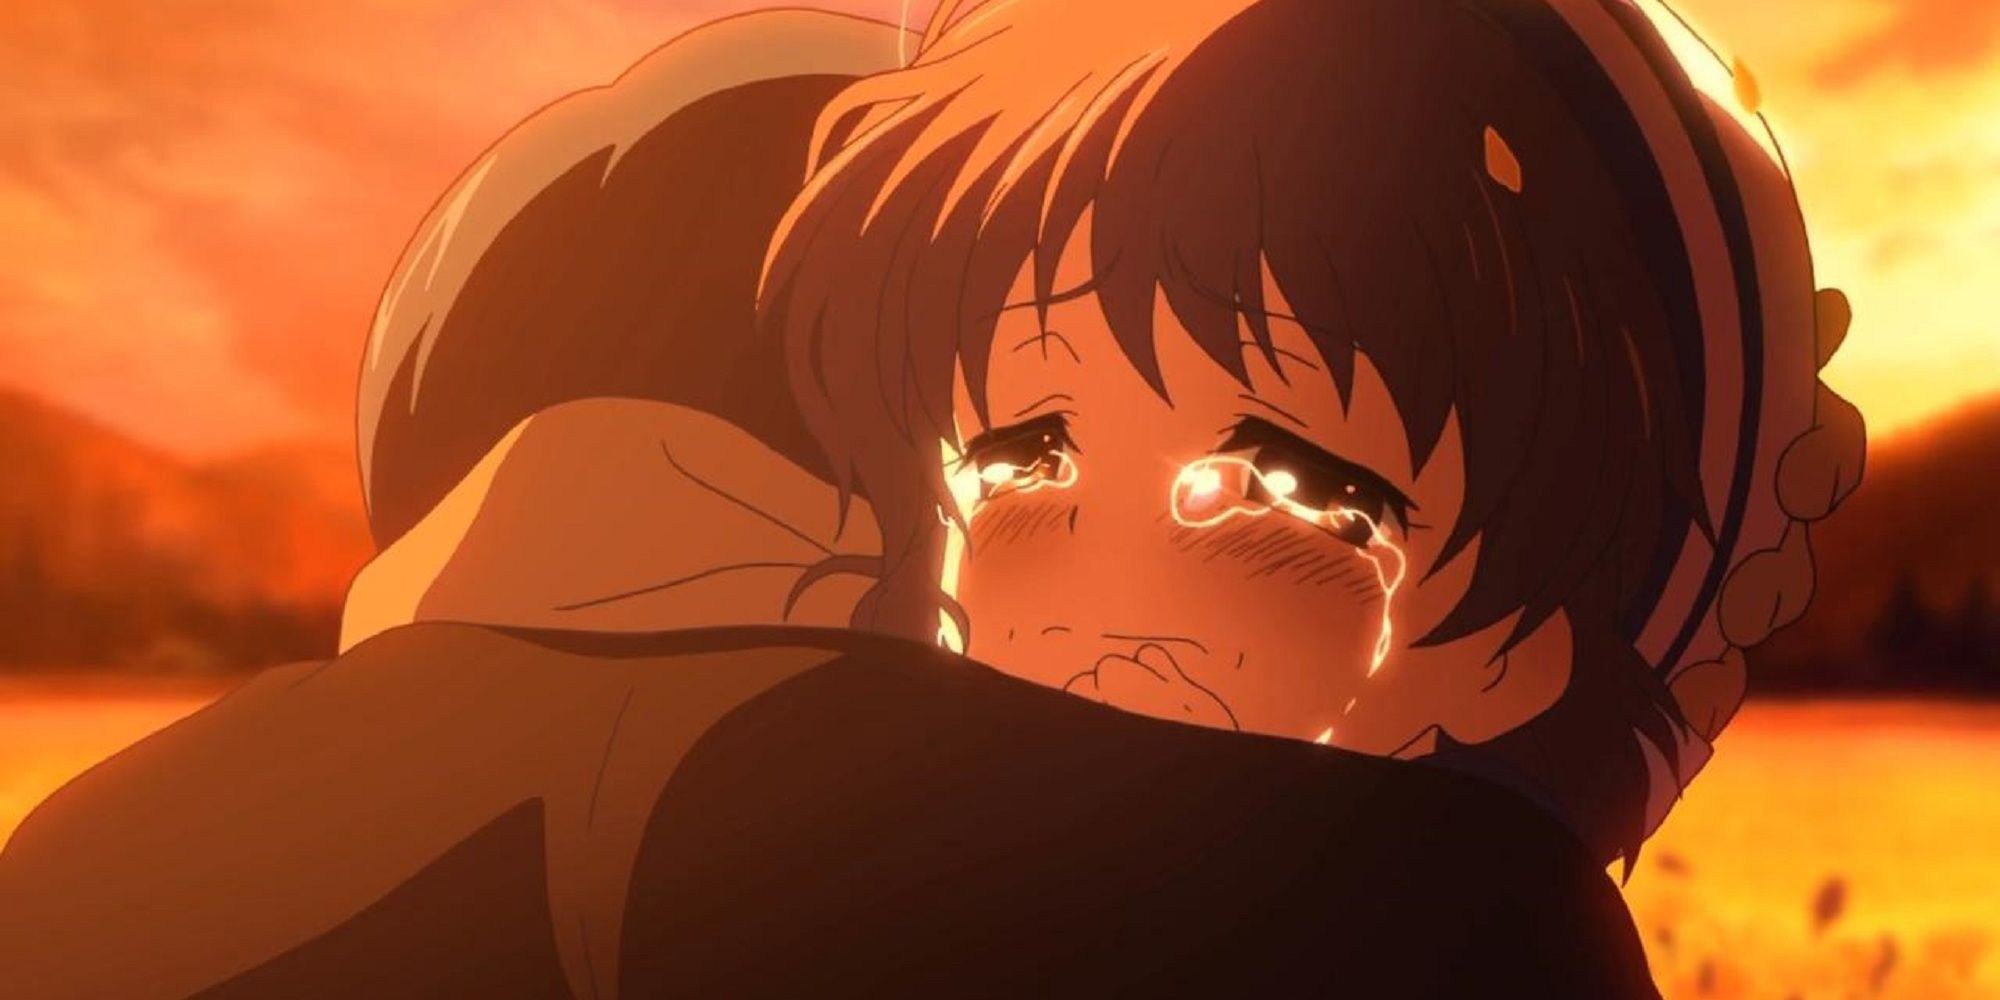 Tearful moment between characters in Clannad: After Story.